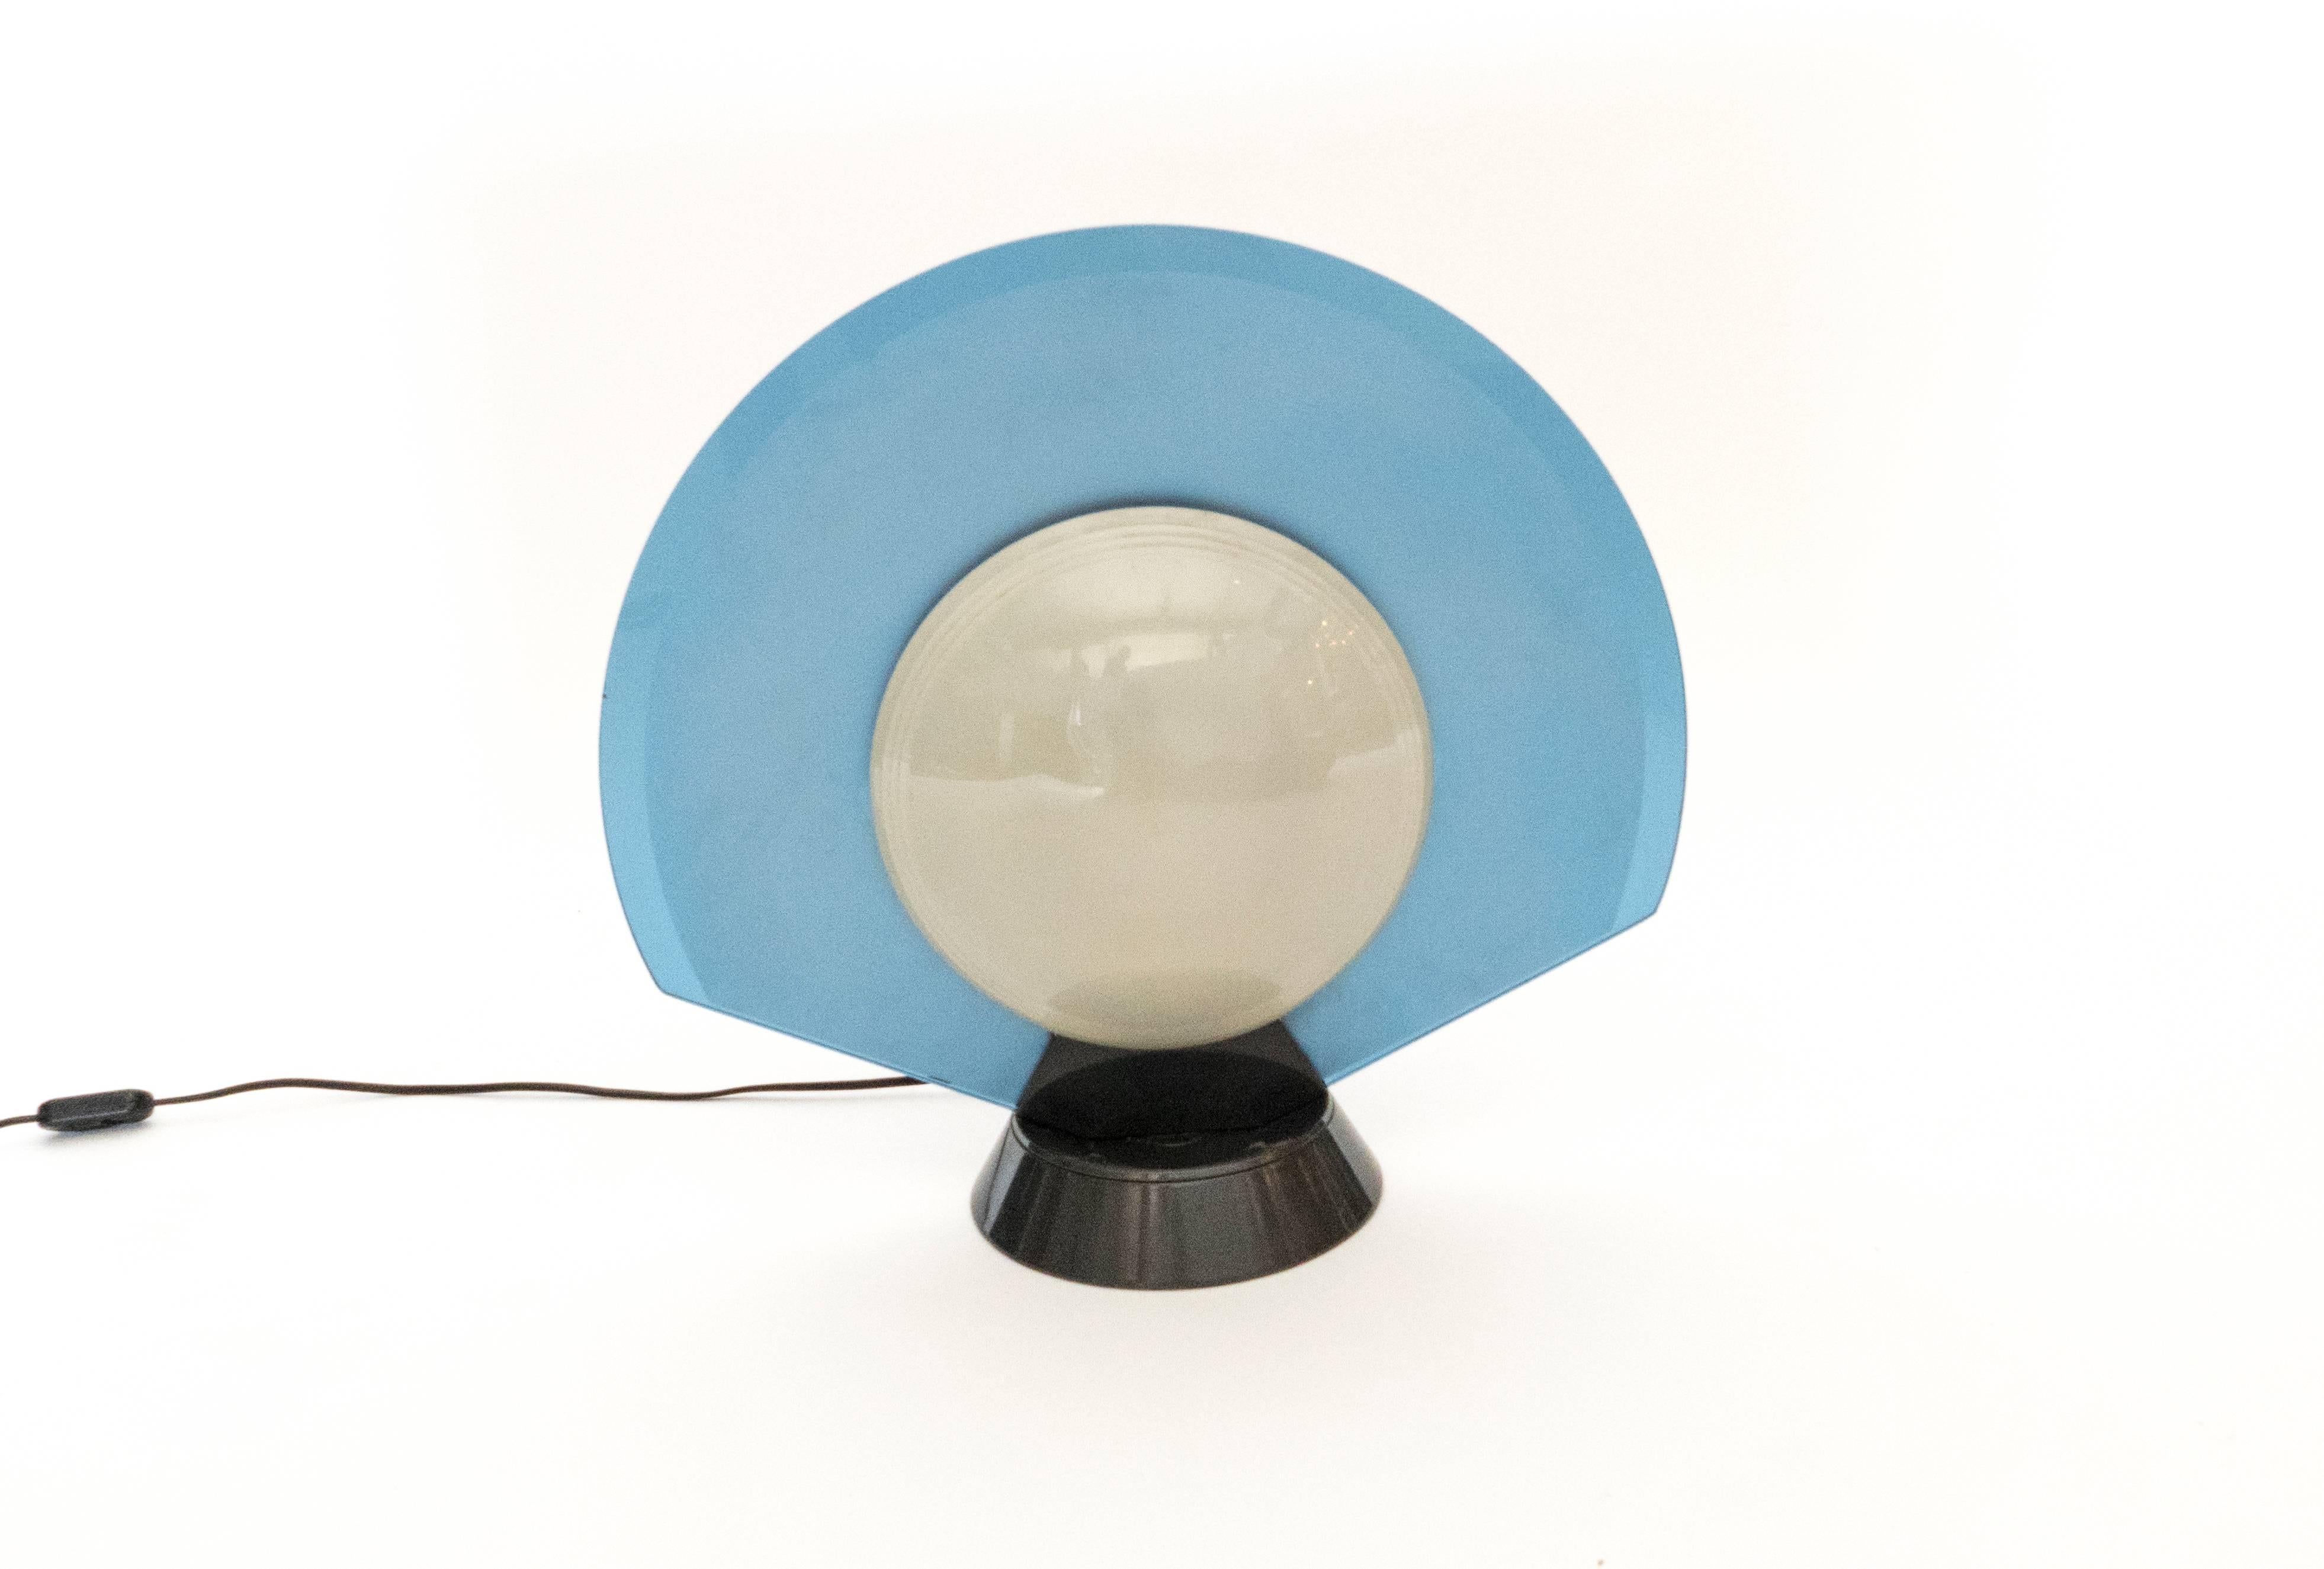 This unique table lamp by Arteluce provides a soft Directional light. The two-sided lamp has one opaque lens and one translucent one. The bronze colored base allows the frosted blue fan to twist and direct the light in all directions. The plastic